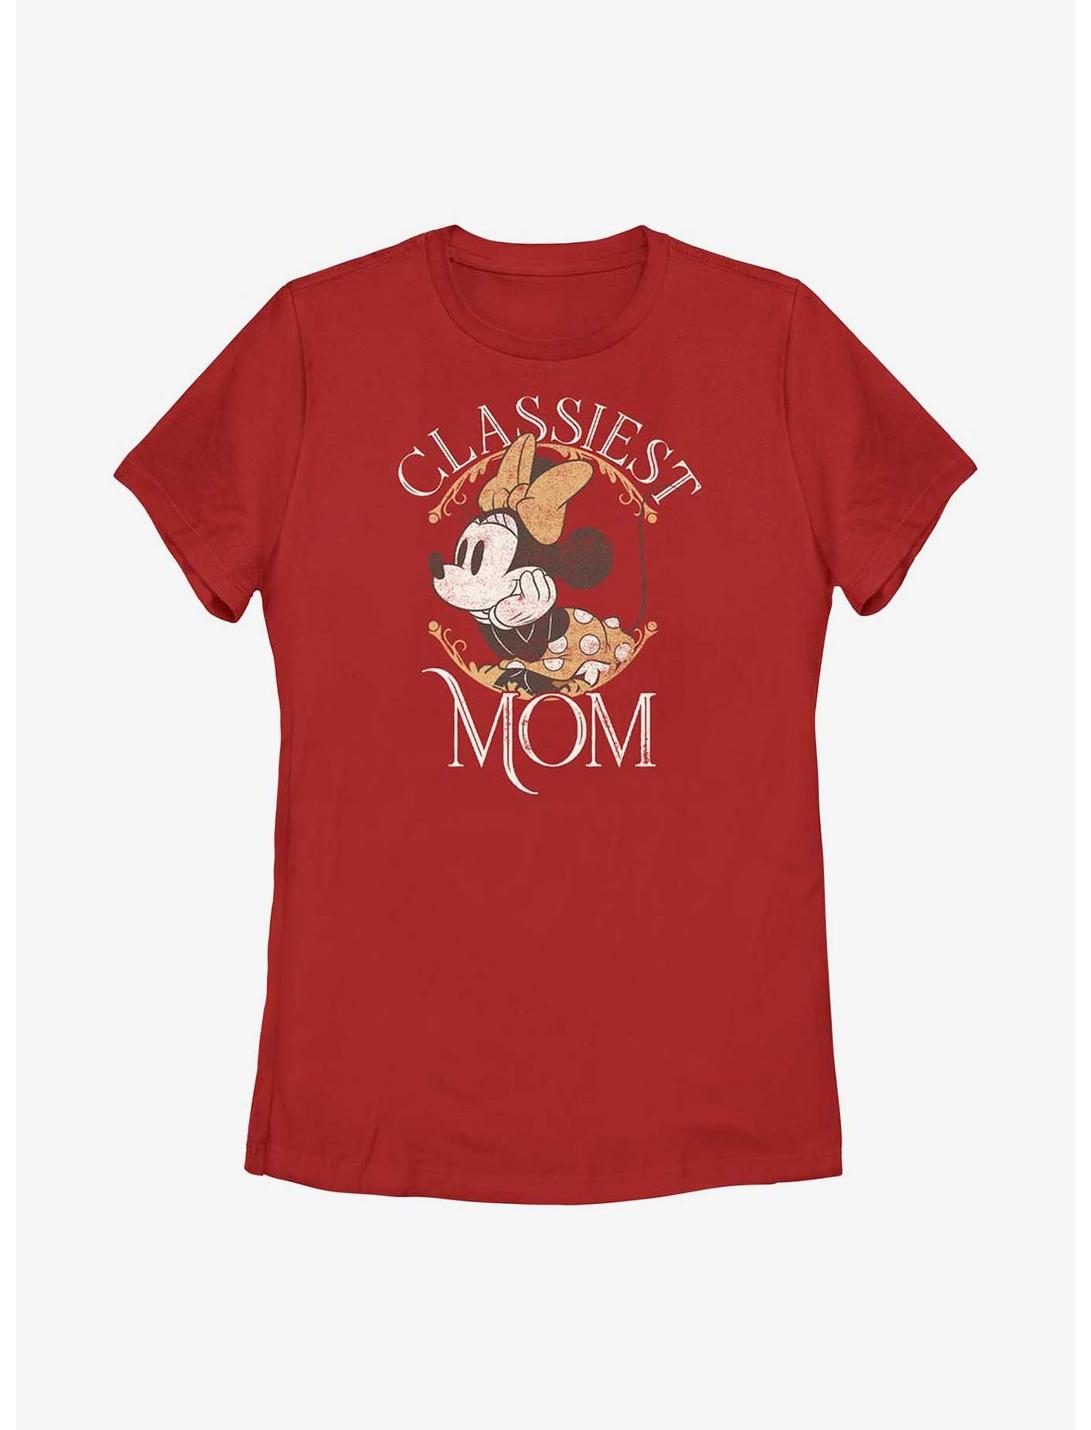 Disney Minnie Mouse Classiest Mom Womens T-Shirt, RED, hi-res